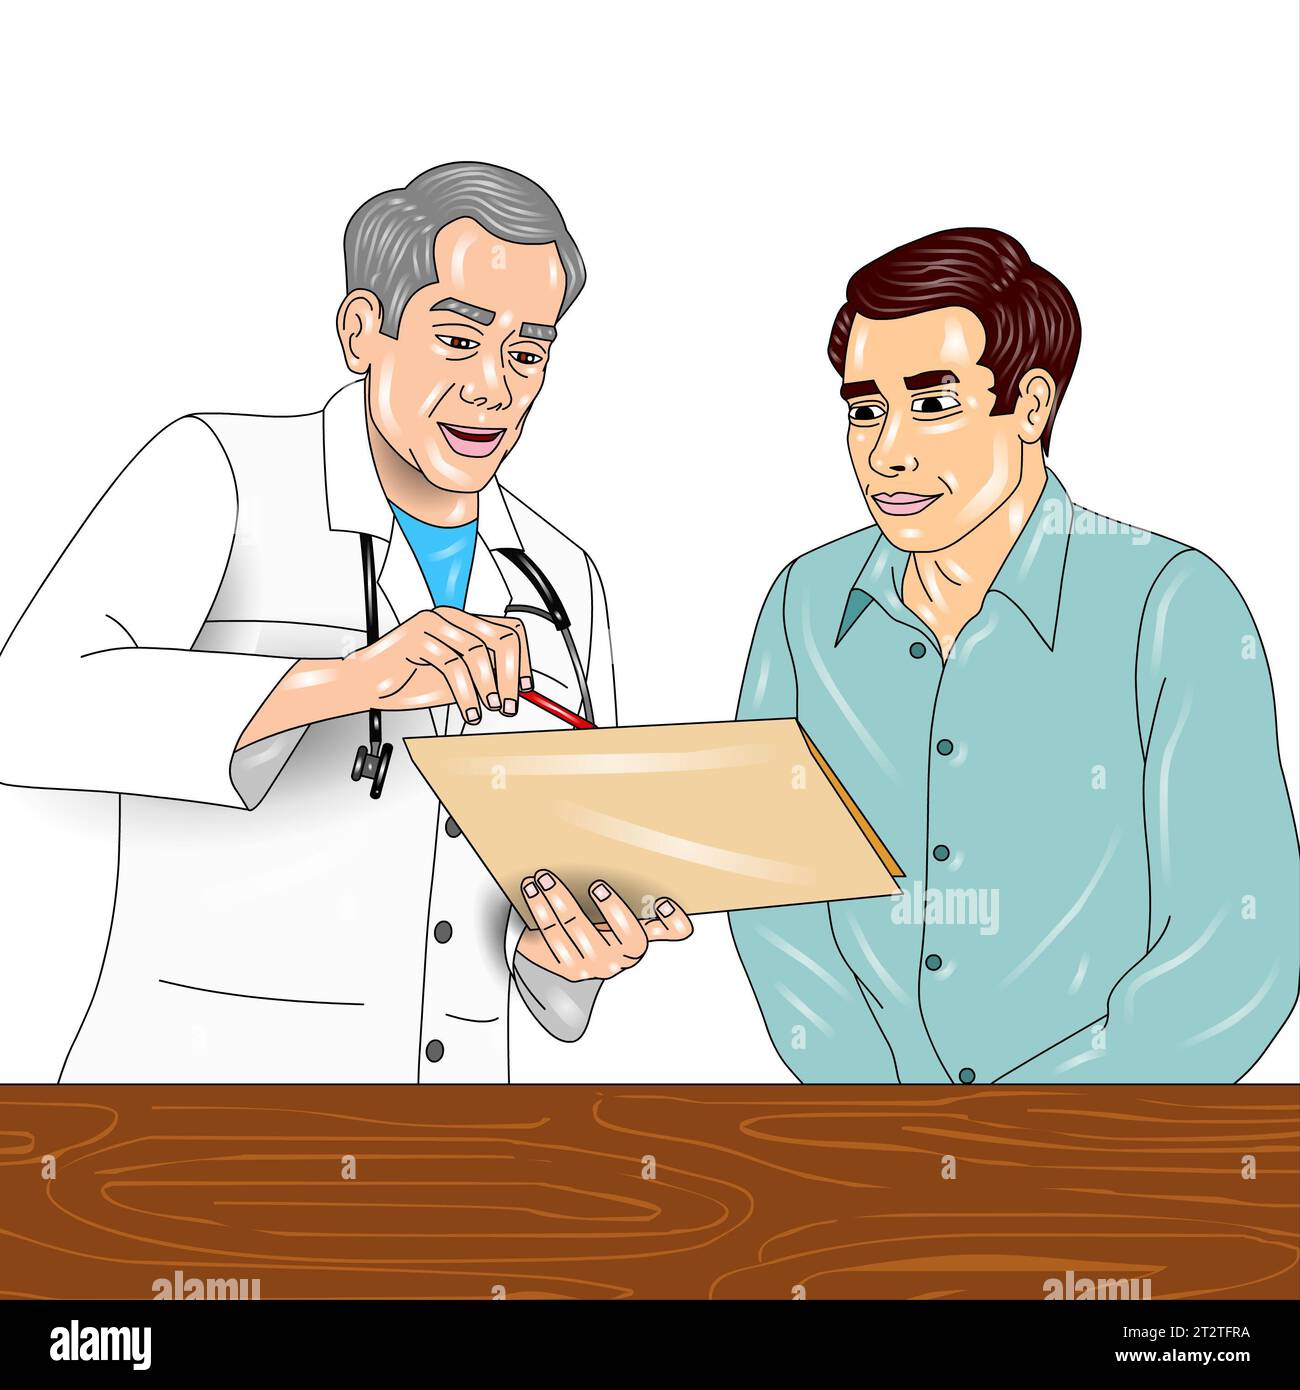 Doctor with Stethoscope Examining Patient's Document Stock Photo